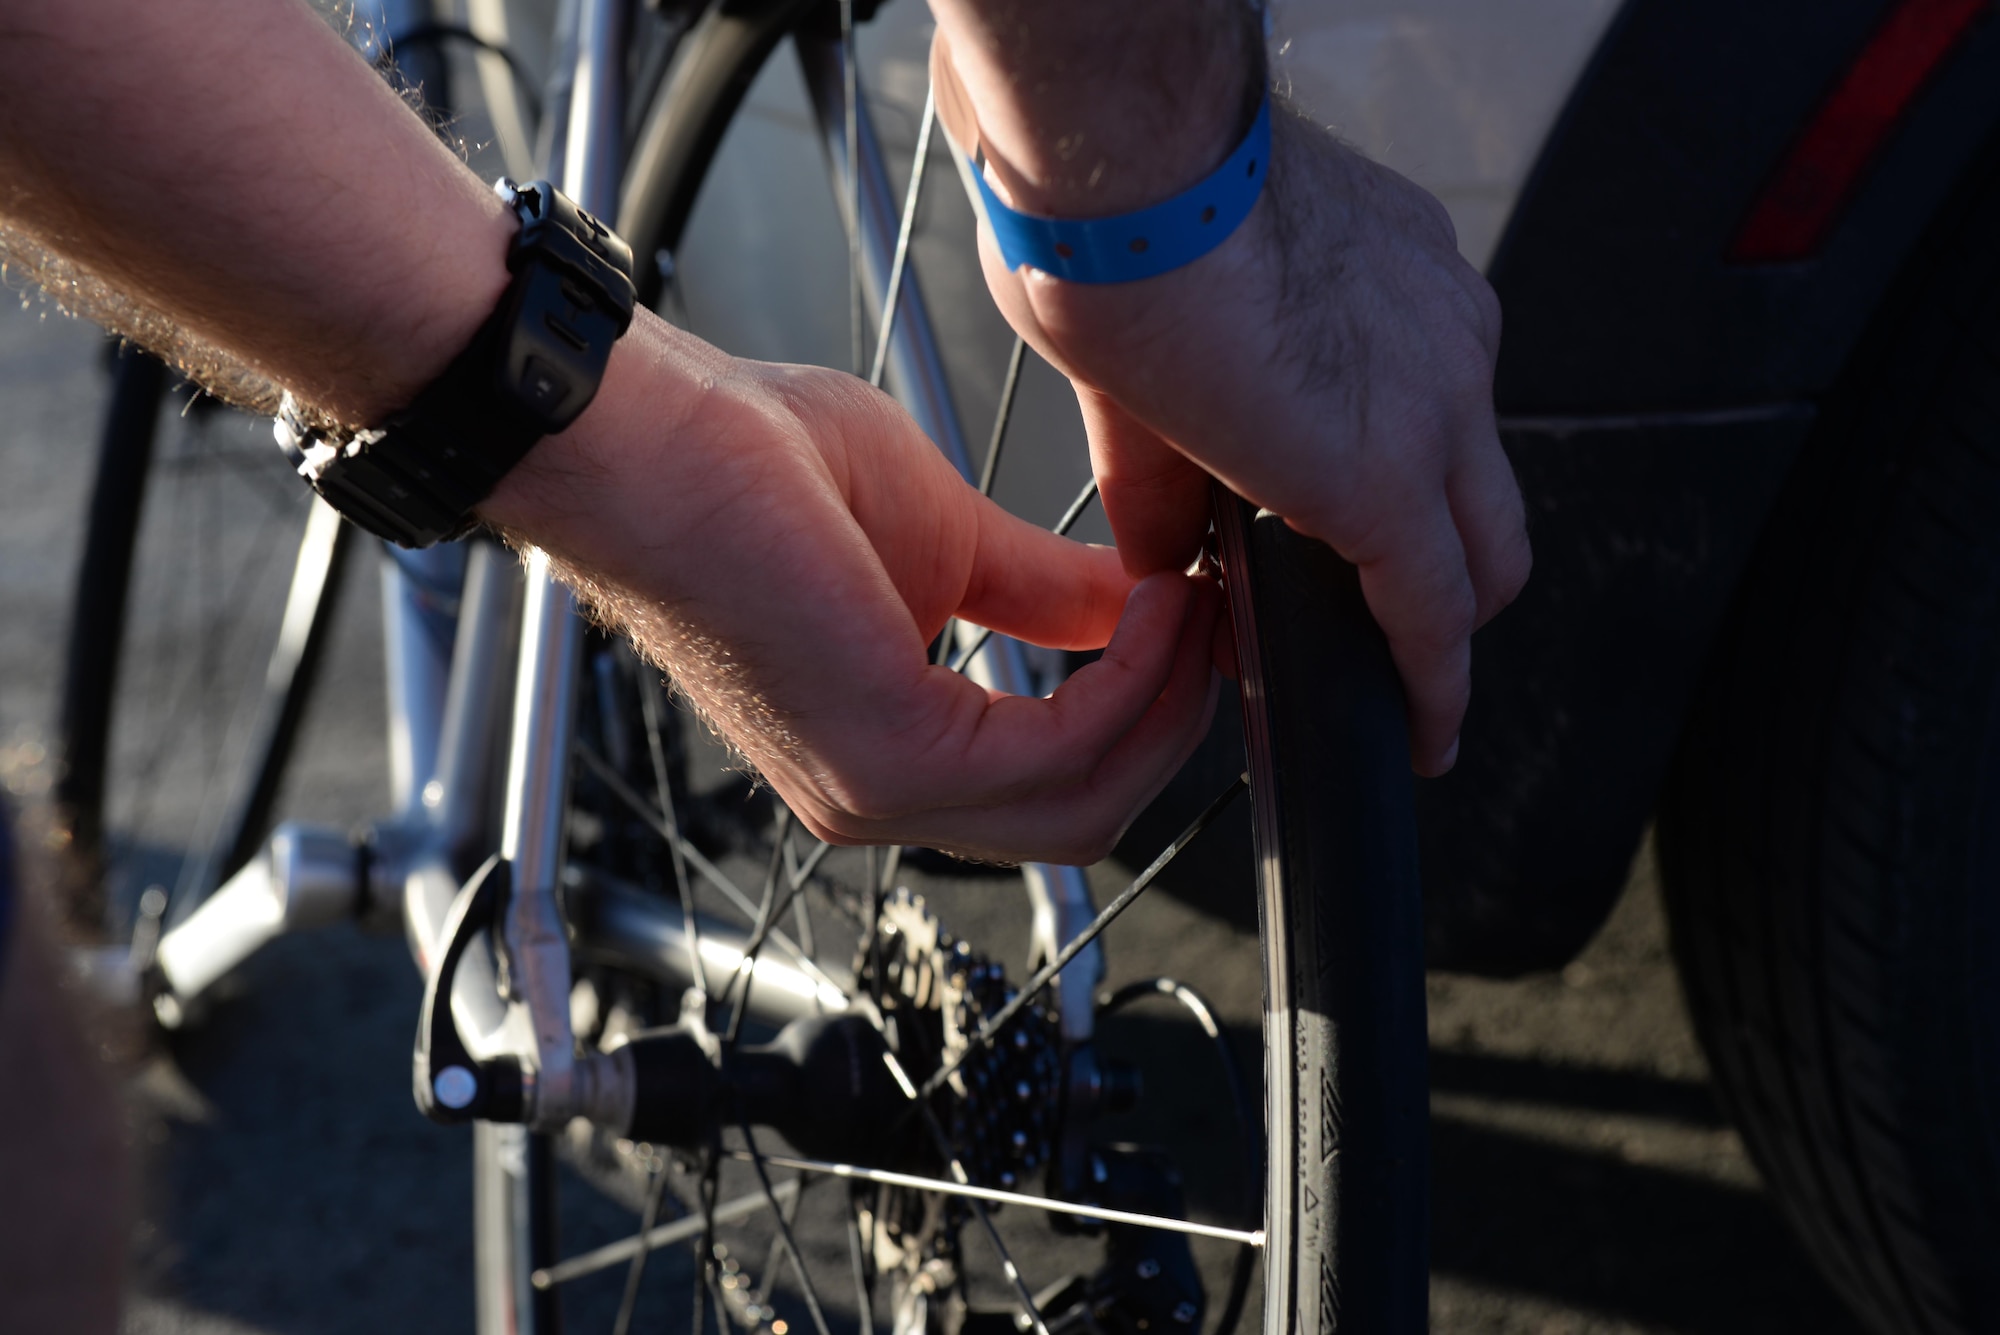 Capt. Eben Egler, a B-1 bomber weapon systems officer assigned to the 34th Bomb Squadron, checks the tire pressure of his bicycle in Rapid City, S.D., June 4, 2017. Egler is part of the Air Force Cycling Team that partakes in the Register’s Annual Great Bicycle Ride Across Iowa in July. (U.S. Air Force photo by Airman Nicolas Z. Erwin)